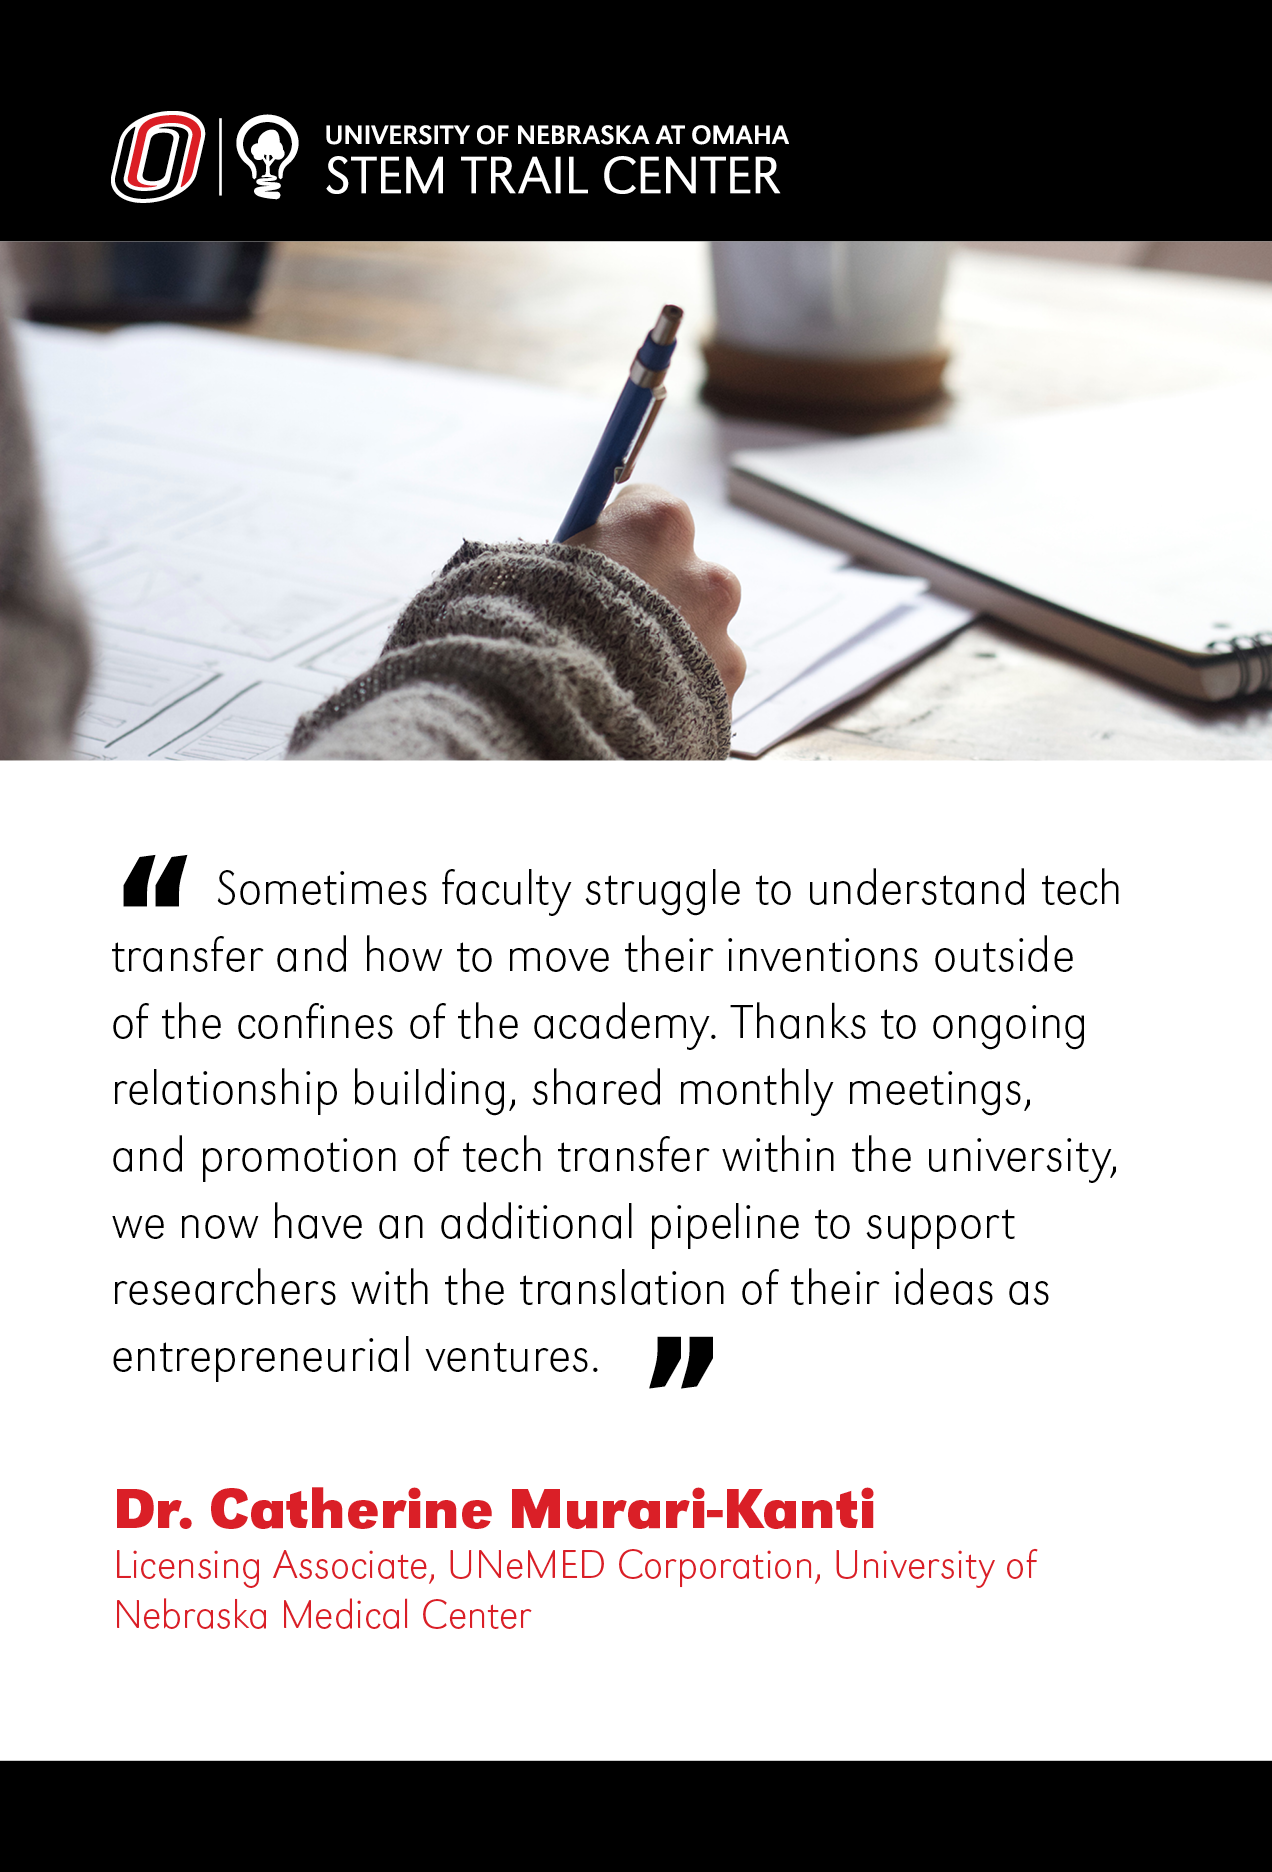 Image of a hand writing on paper. A quote from Dr. Catherine Muraru-Kanti